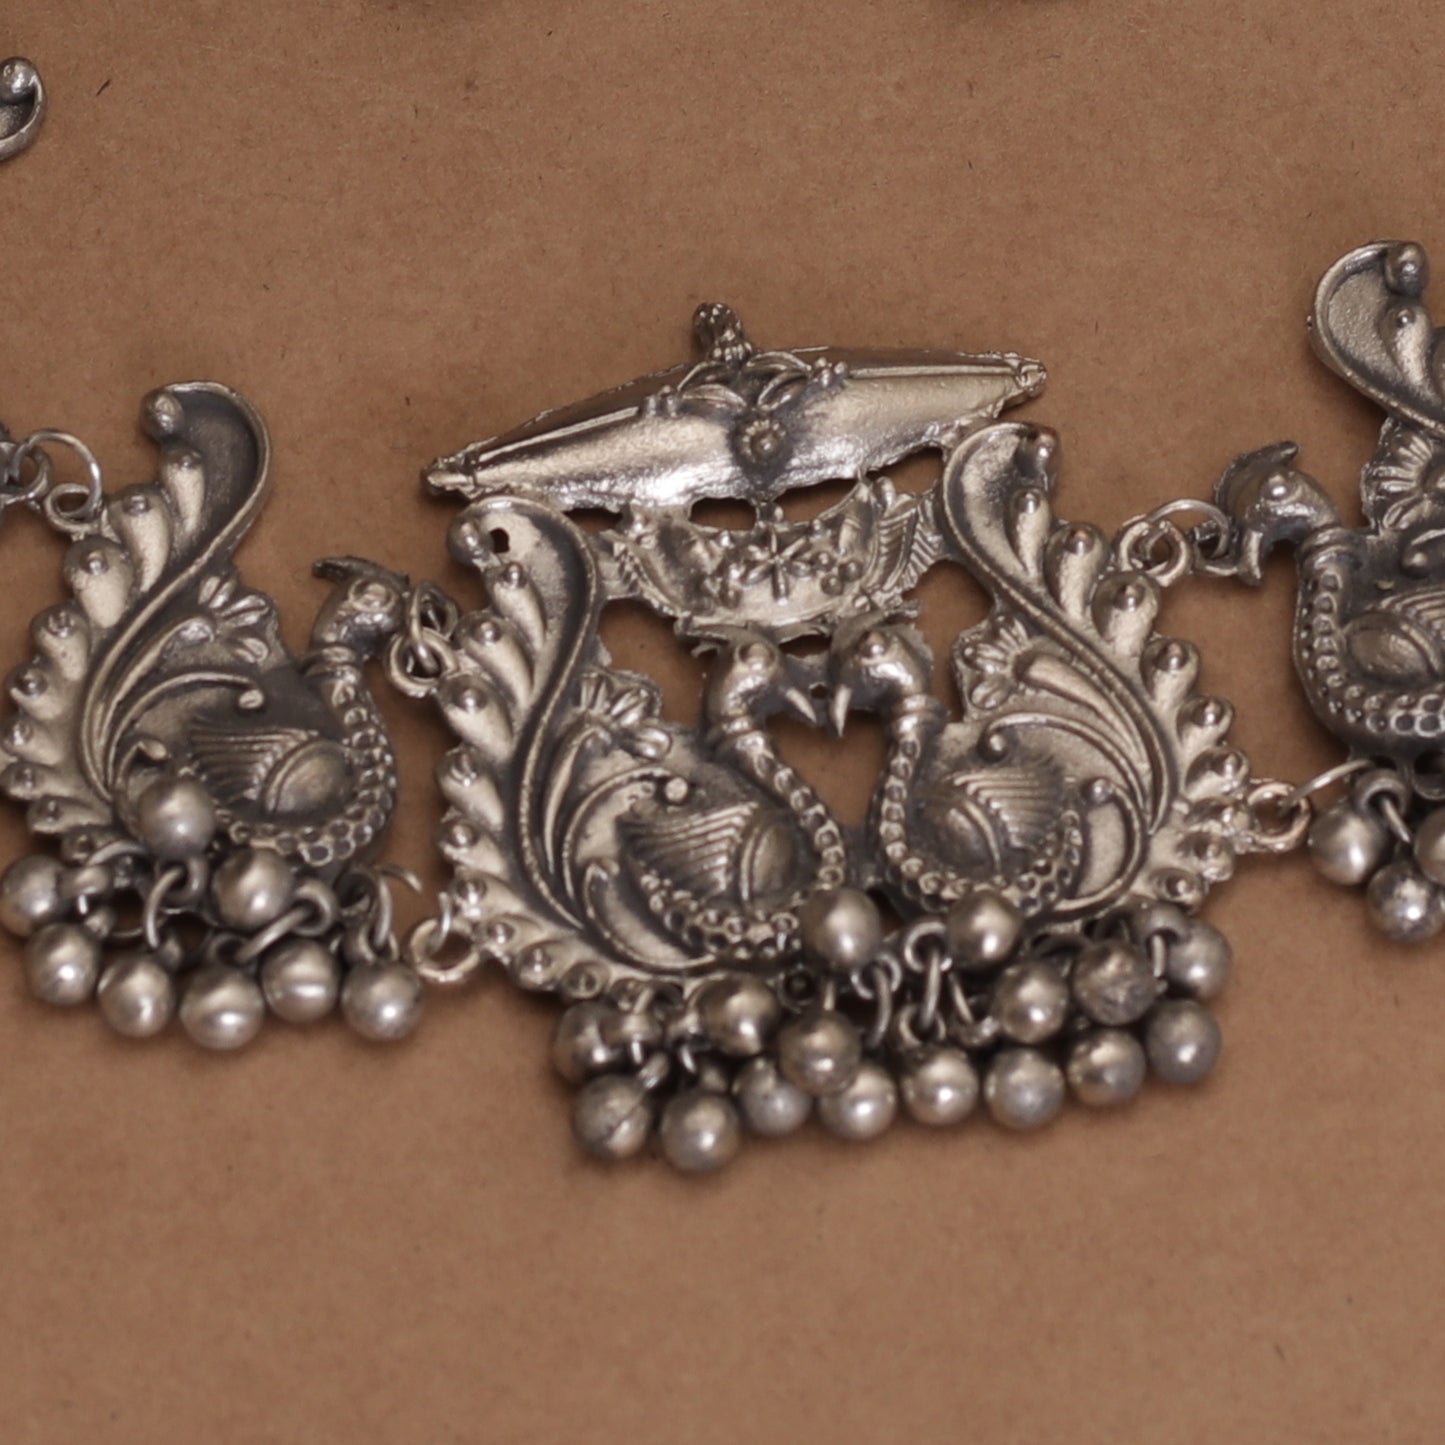 The Soothing Avian Silver Oxidized Necklace Set